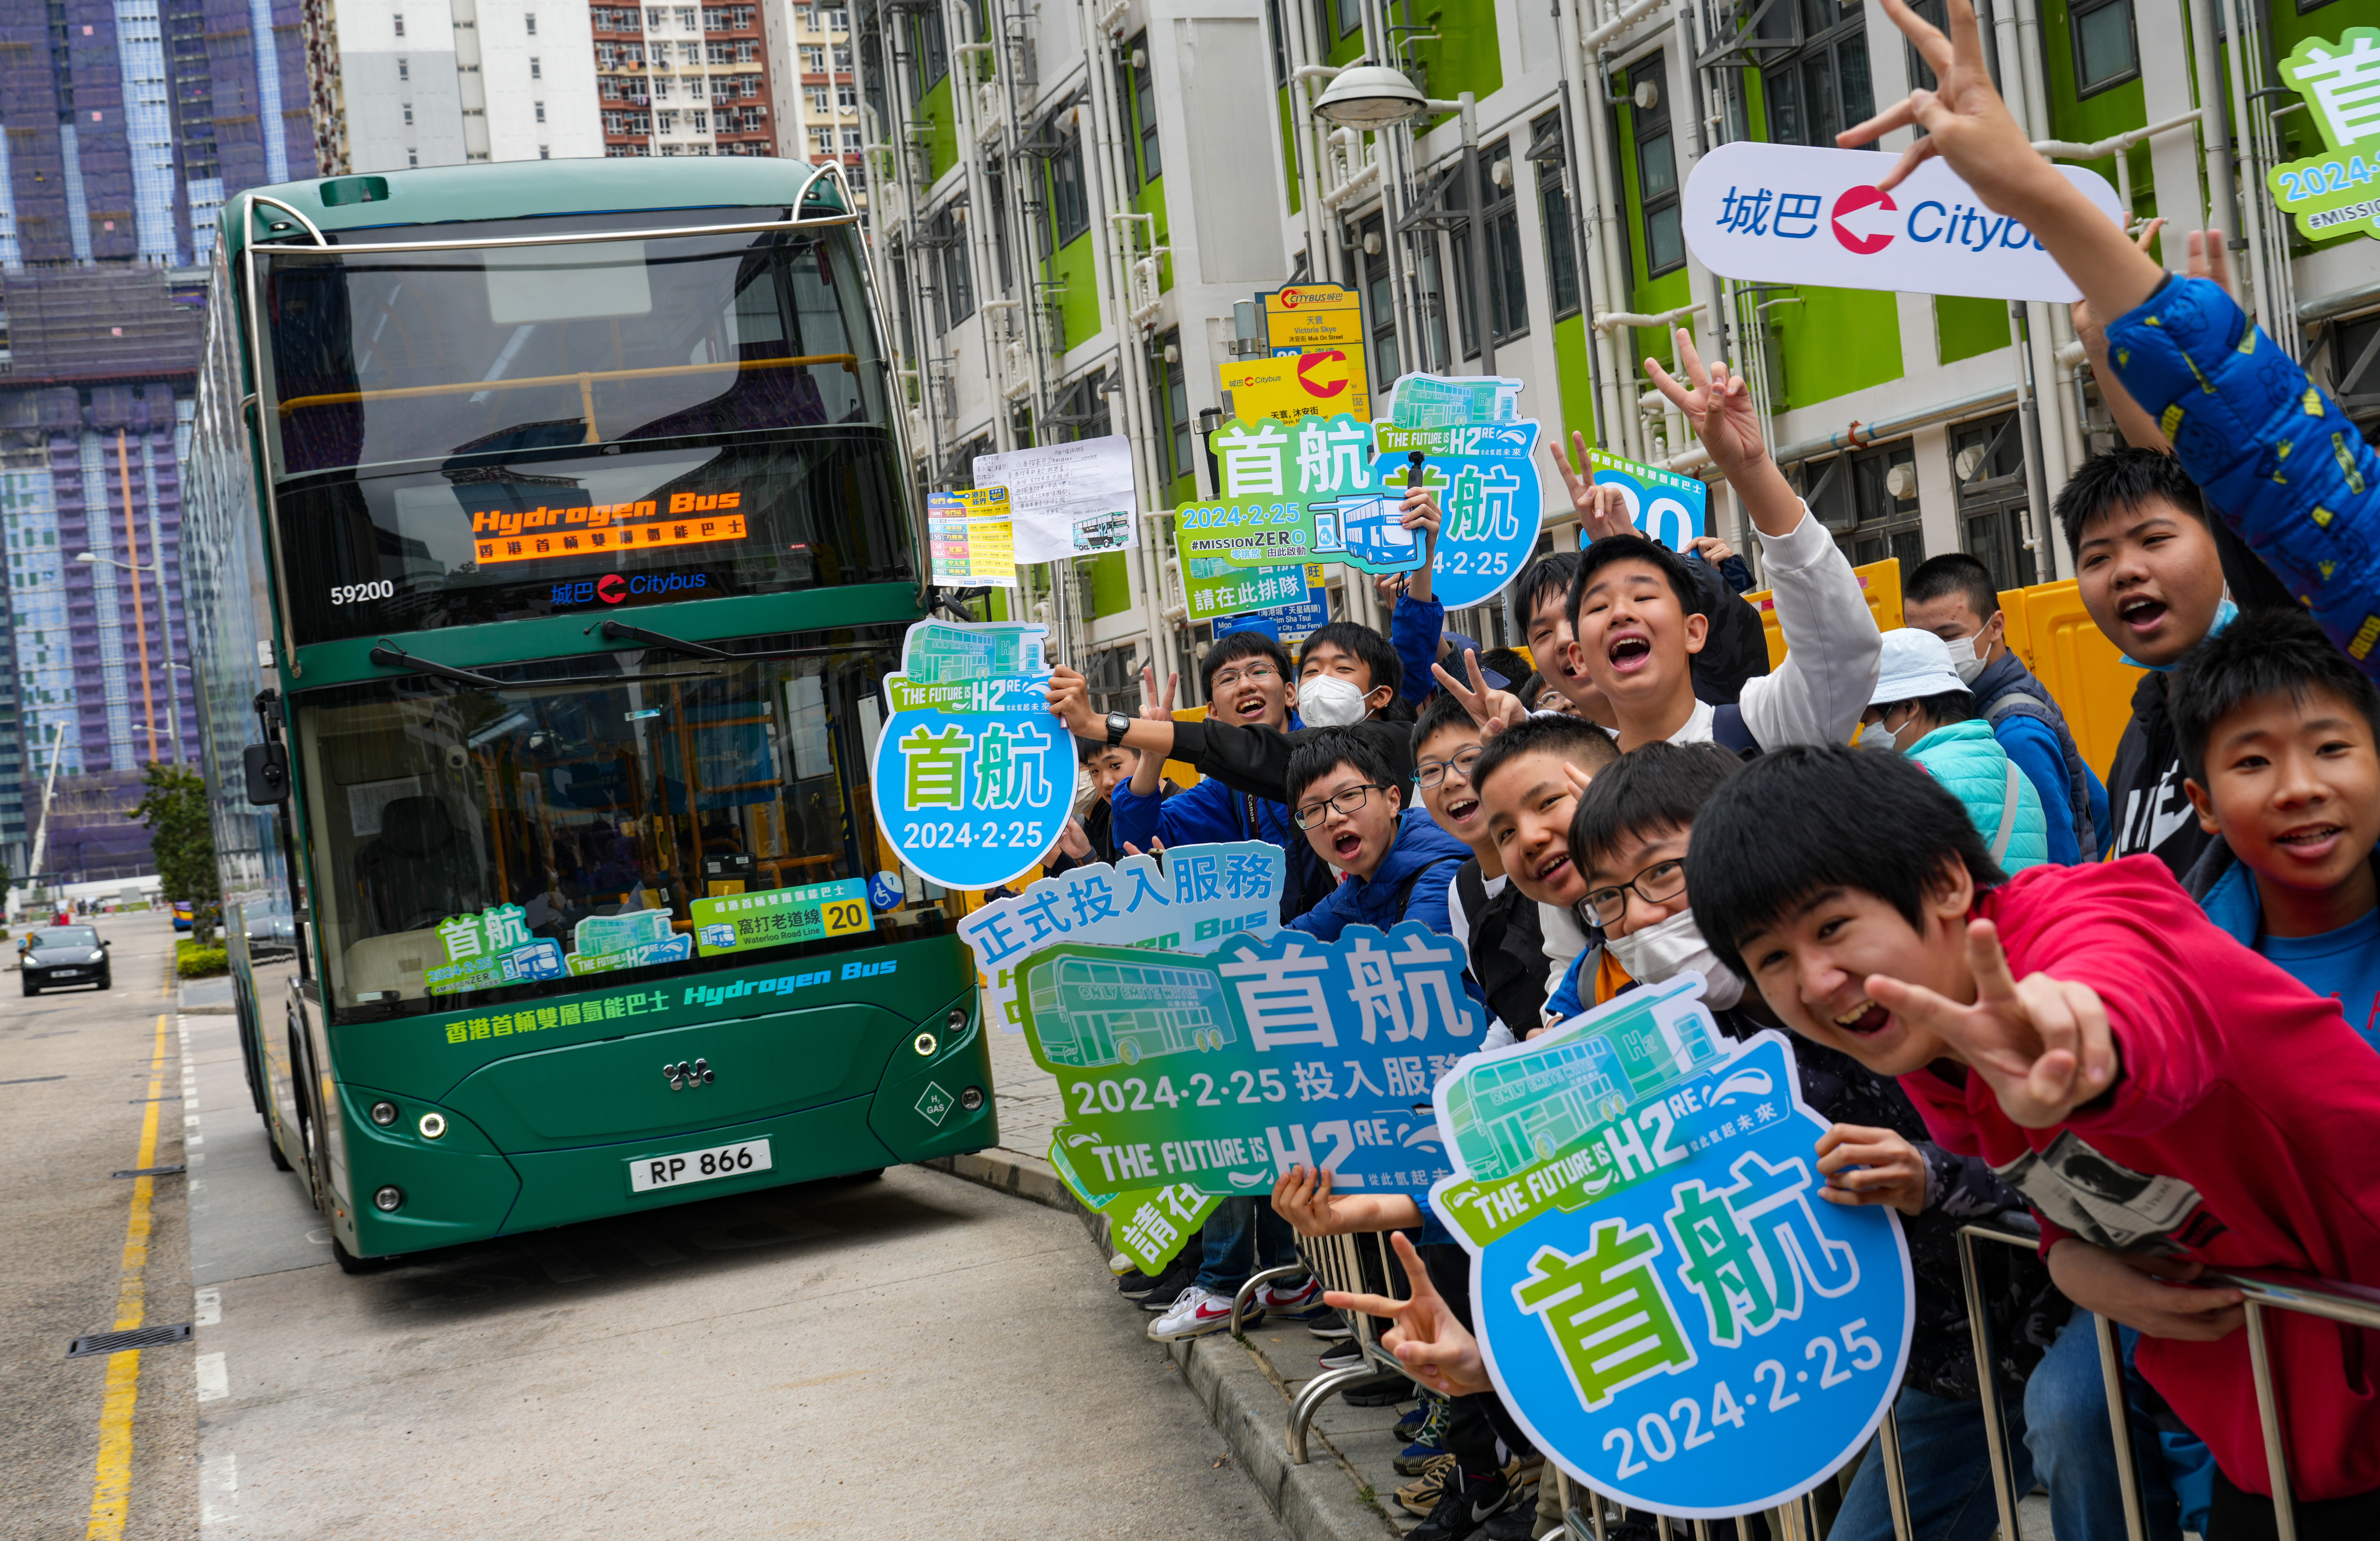 Dozens of bus fanatics, with some queueing hours  in anticipation, cheer on board the maiden voyage of Hong Kong’s first hydrogen-powered double-deck bus. Photo: Sam Tsang